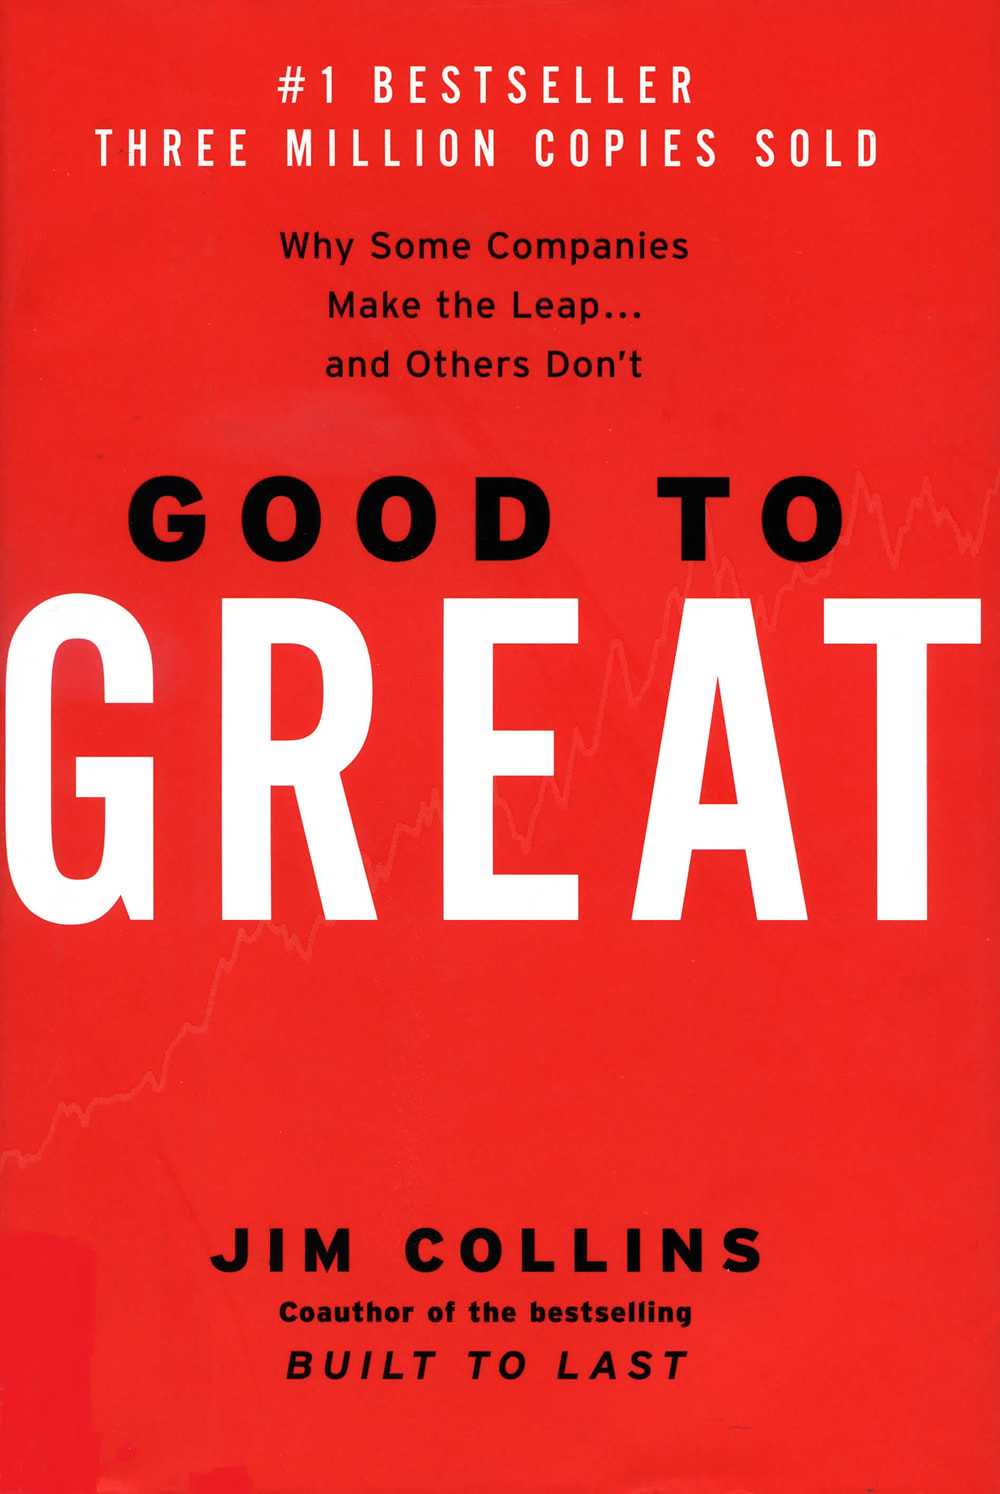 GOOD TO GREAT by Jim Collins